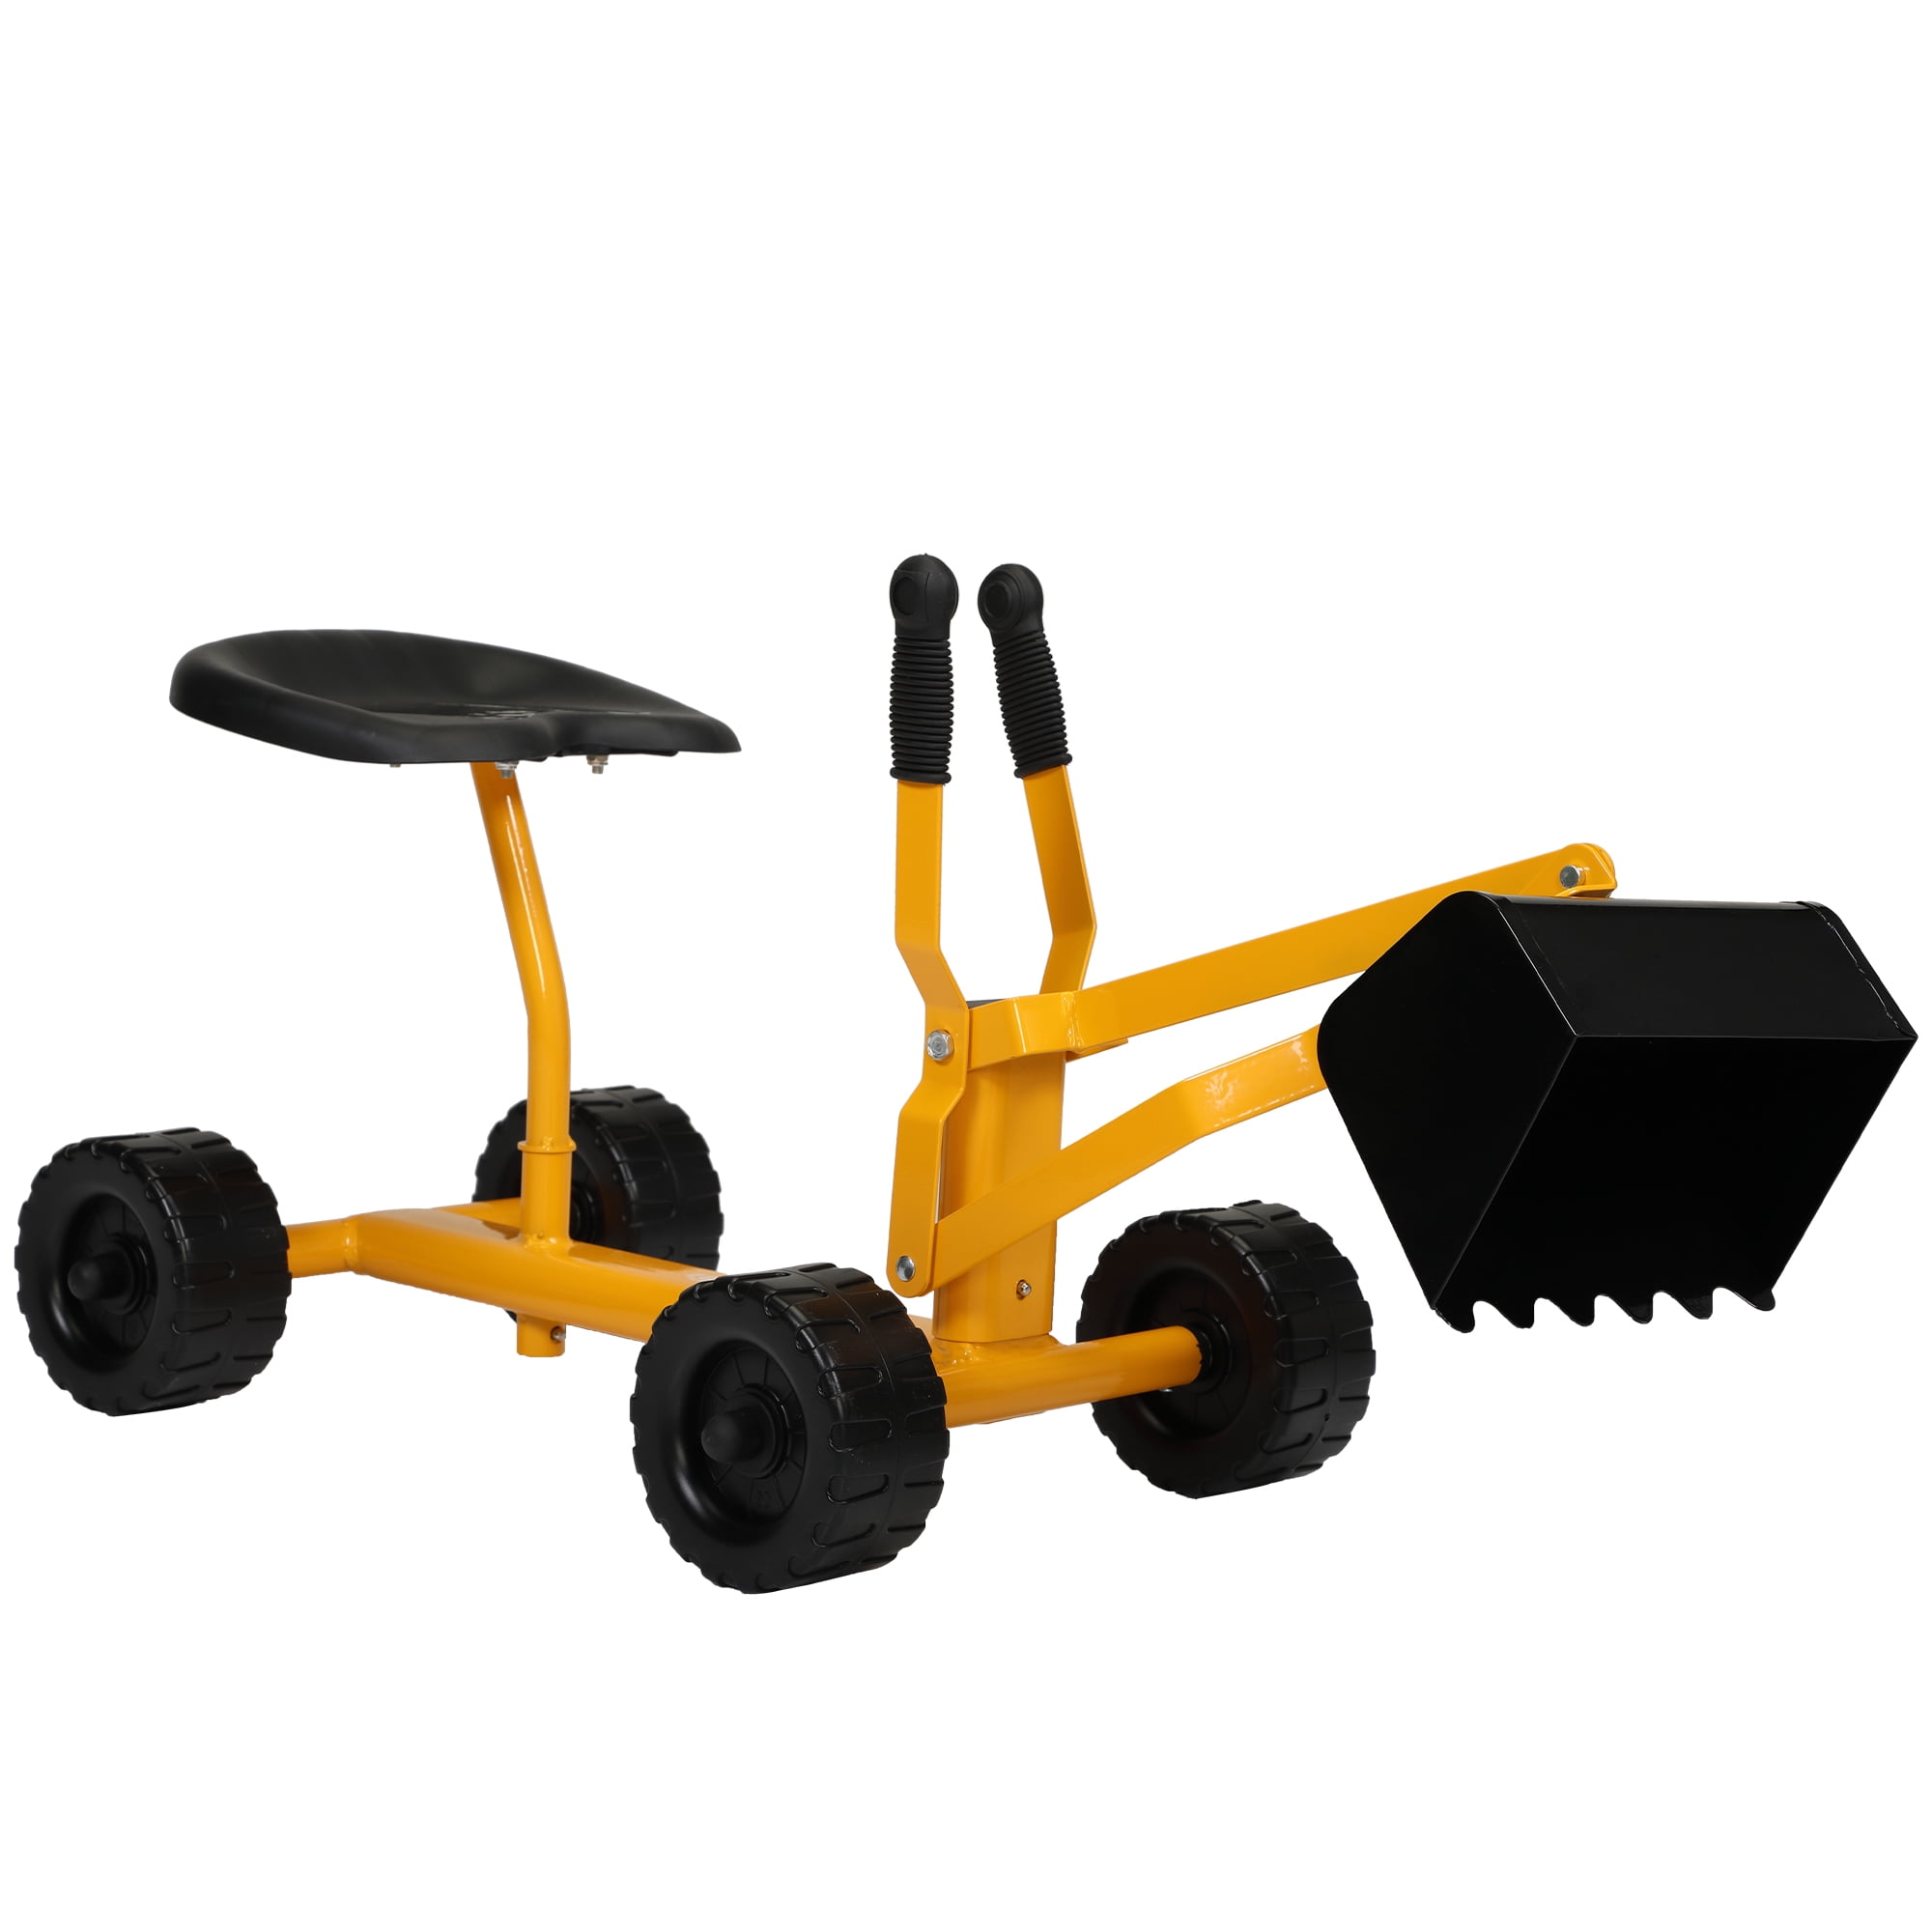 Heavy Duty Kid Ride-on Sand Digger Digging Scooper Excavator for Sand Toy